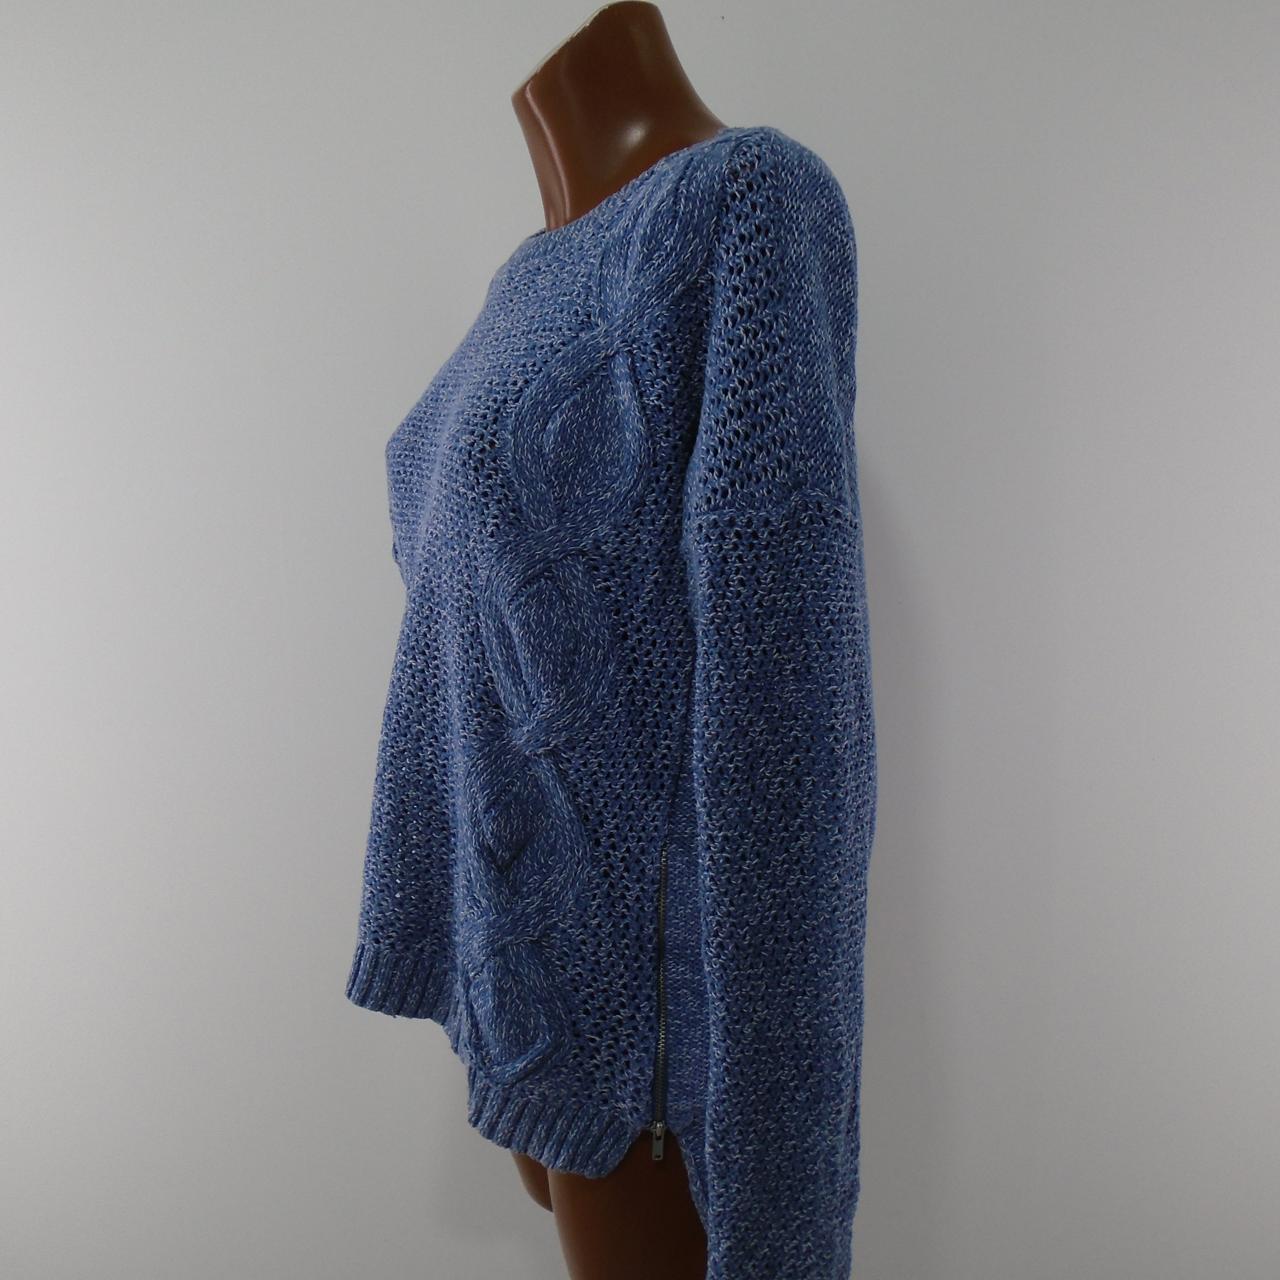 Women's Sweater Tommy Hilfiger. Blue. M. Used. Good